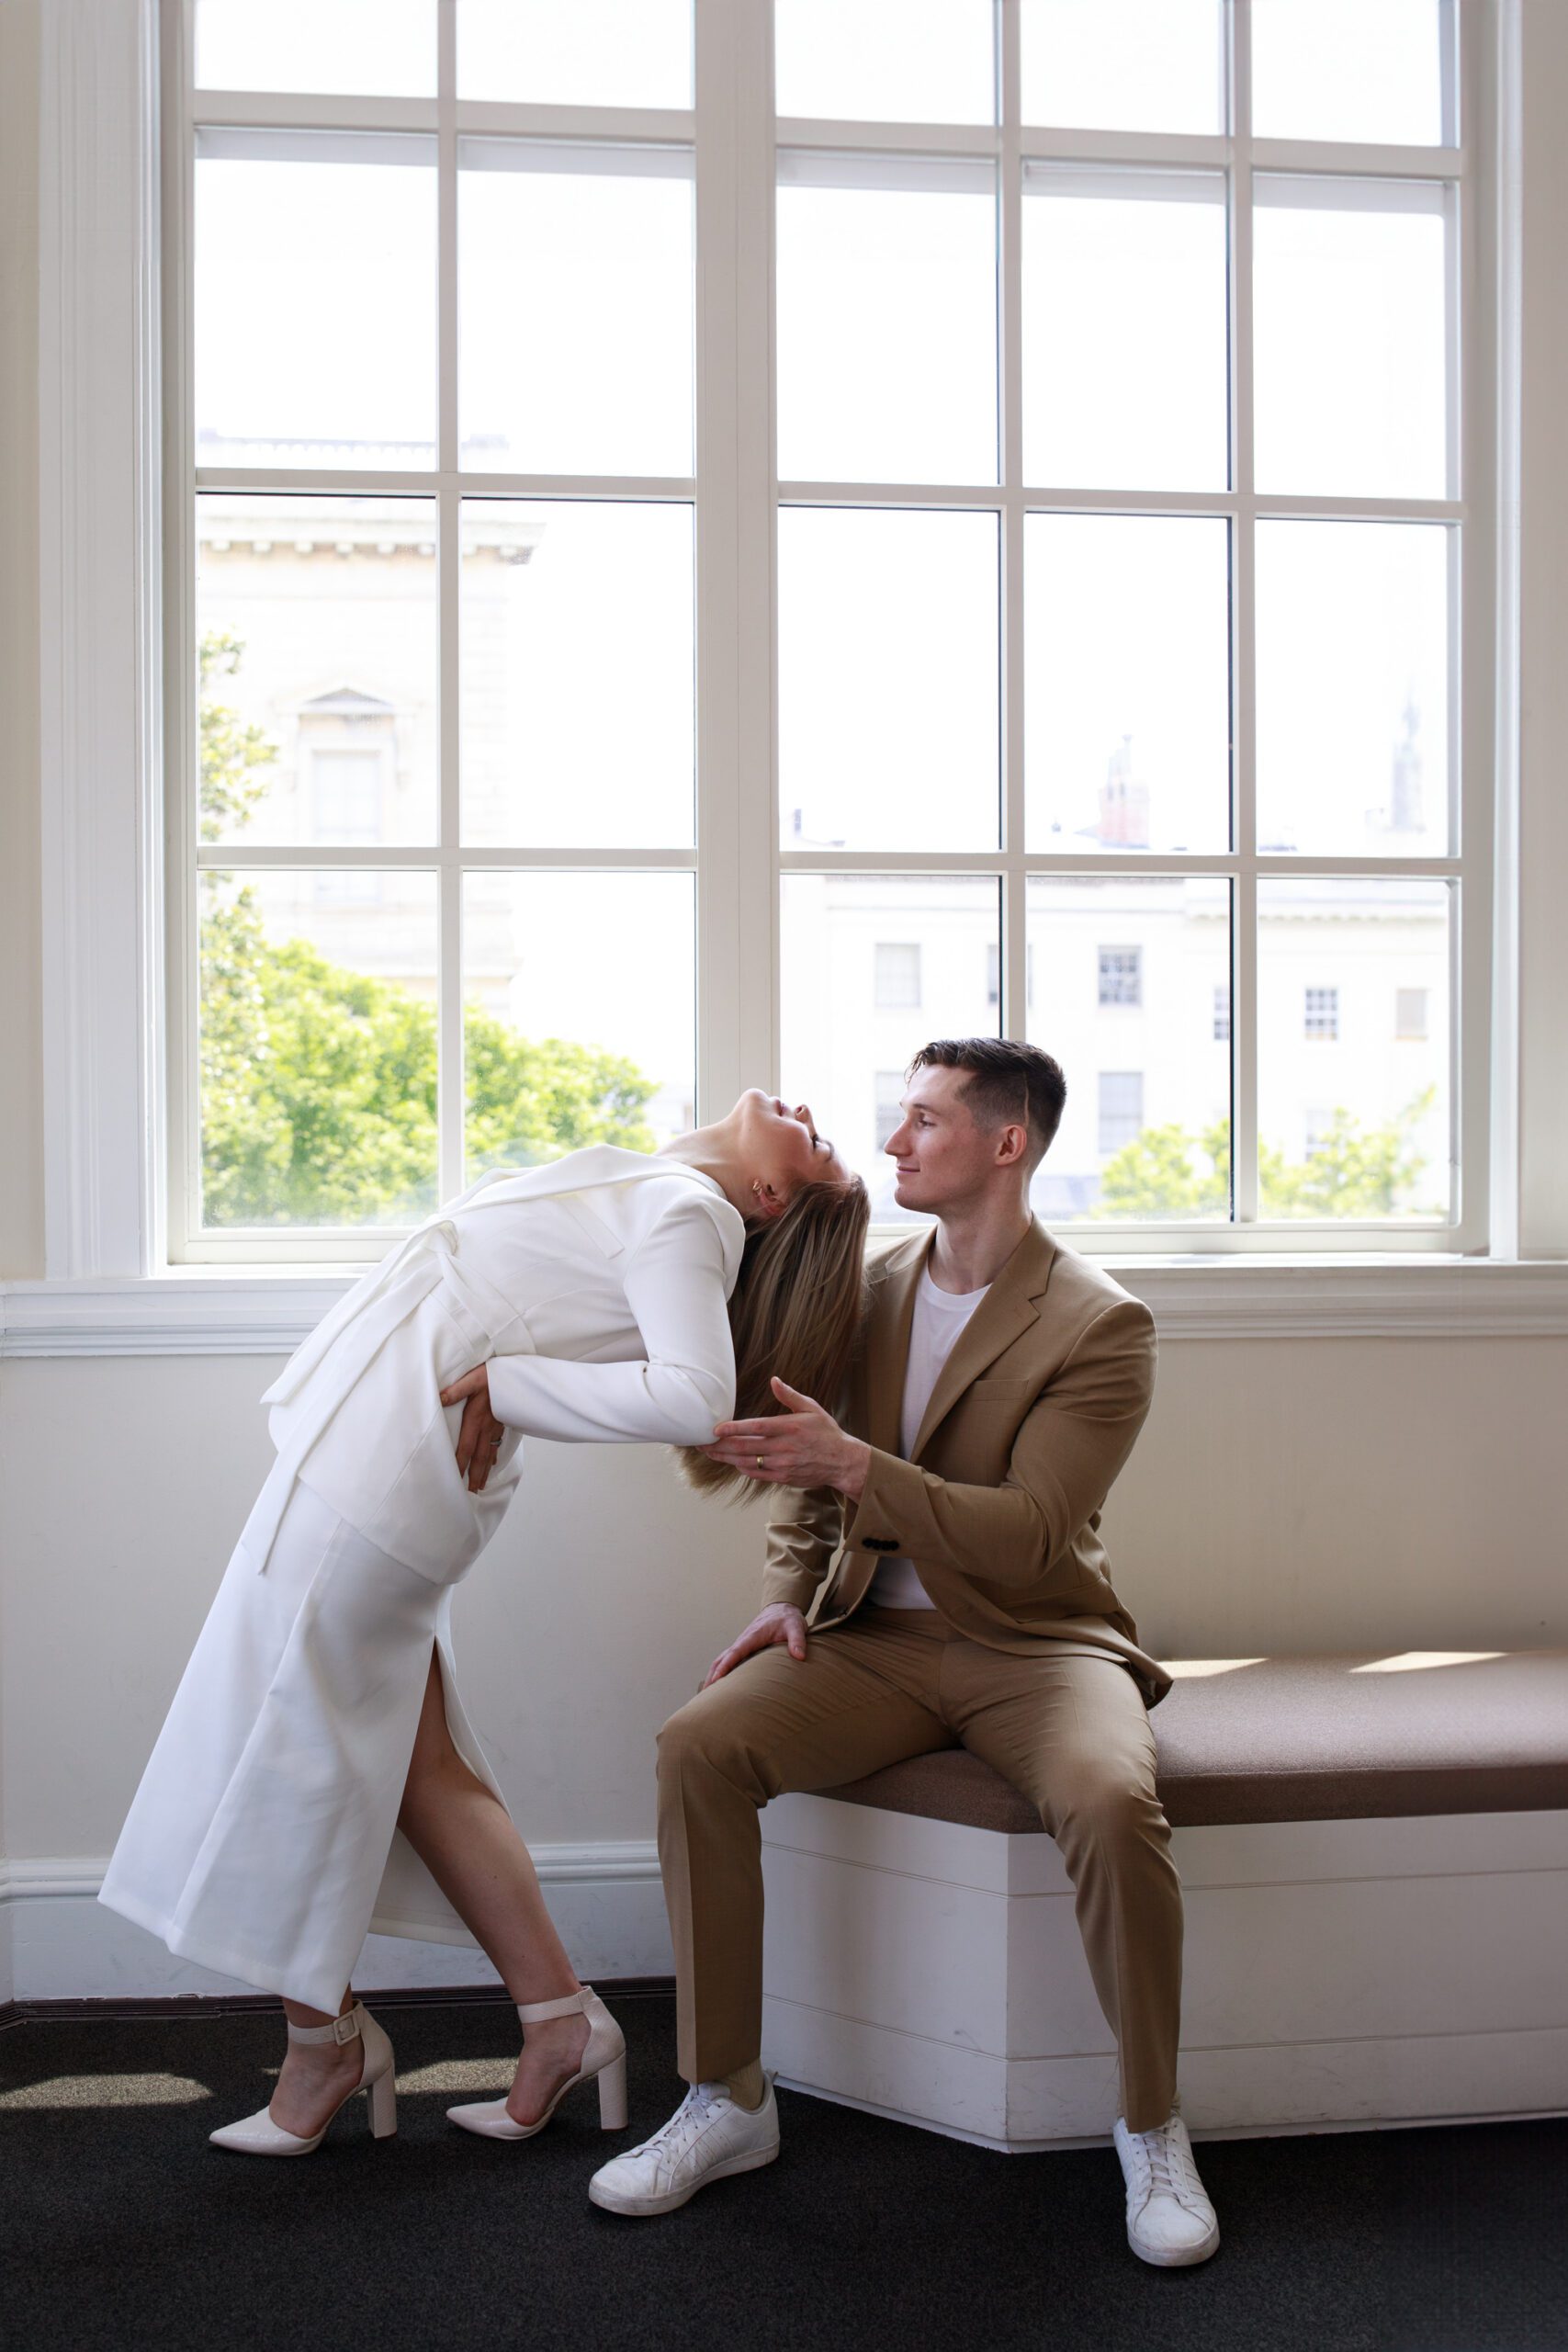 Unique art gallery engagement photos. The bride is arching her back in a romantic way towards her groom, who is seated nearby.